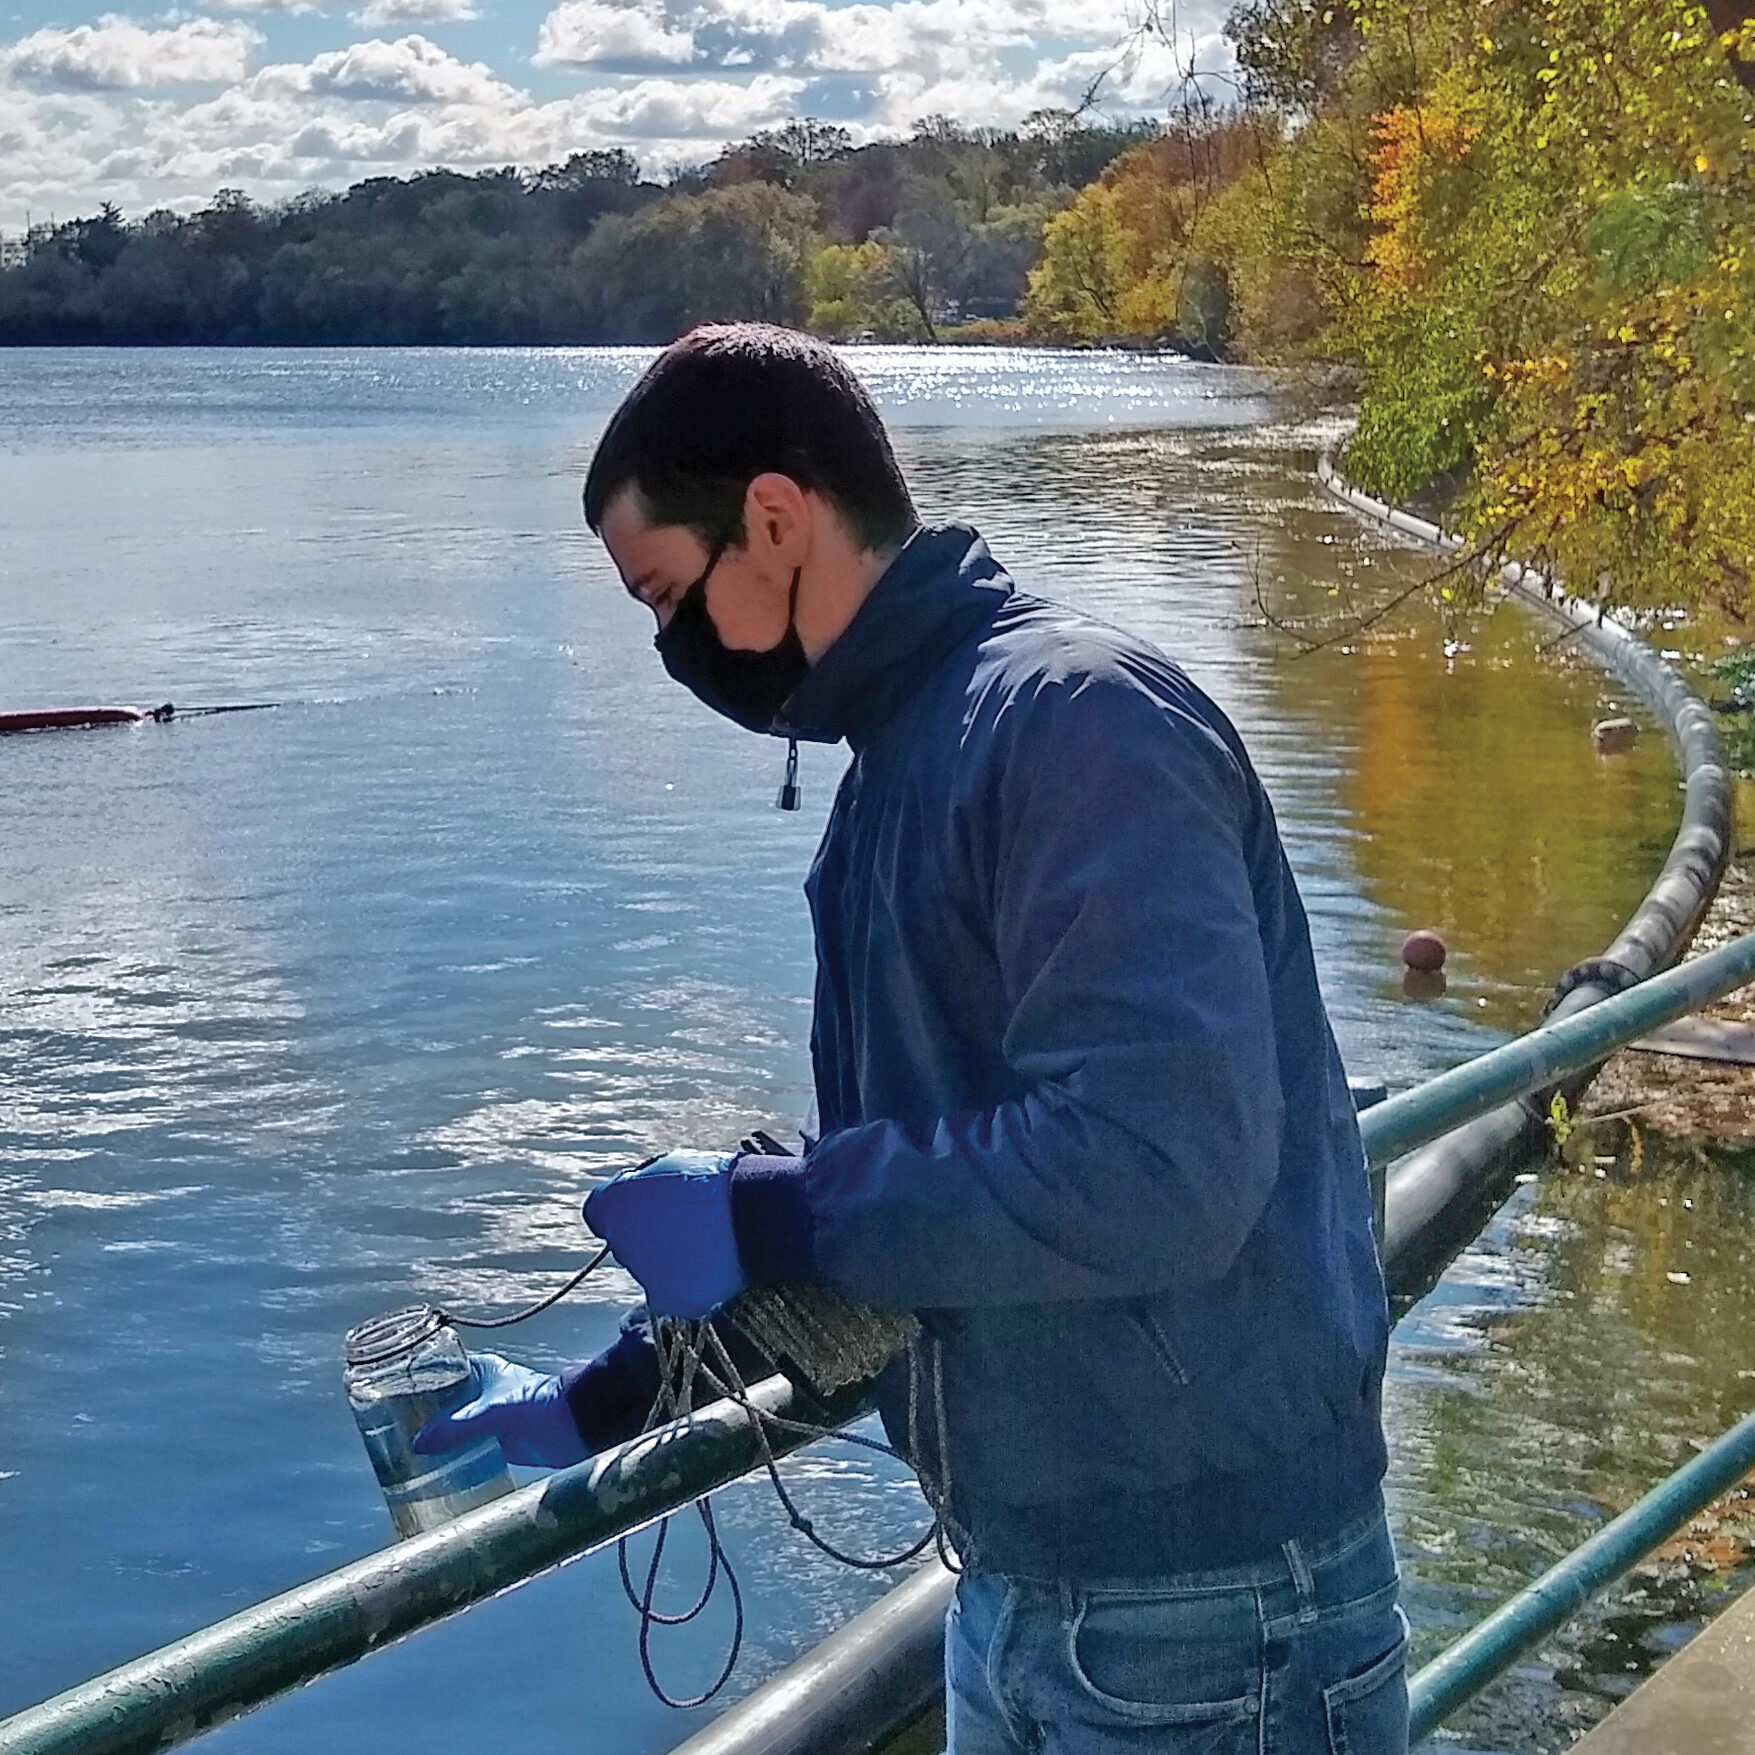 A PWD employee with short dark hair, light skin, a black face mask, blue jacket and jeans, and purple disposable gloves leans slightly over a railing on a low bridge, having holding a jar full of water attached to a cord used to lower it into the water to collect a sample for testing.